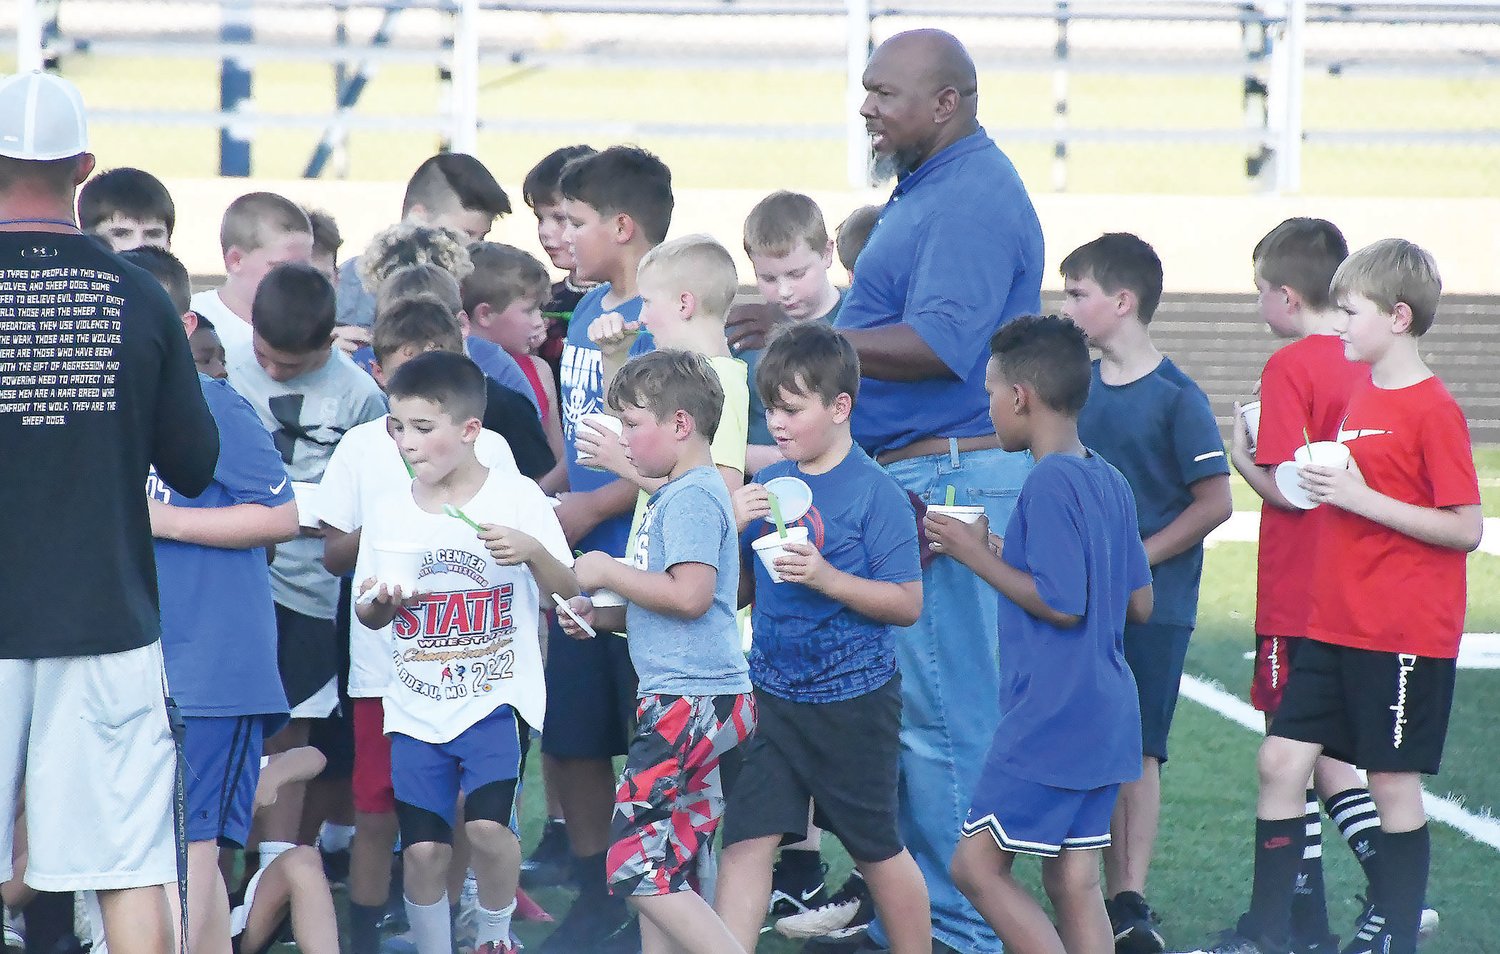 Bobby Godwin (blue shirt, center) has transitioned into the role of Little Spartans football commissioner. Godwin recently reported the tackle football and cheerleading organization needs 16 coaches for its football program, with four per grade level from third through sixth grade. Godwin is shown here during the Little Spartans’ football camp at Dr. Larry K. Noel Spartan Stadium on Thursday, July 21.